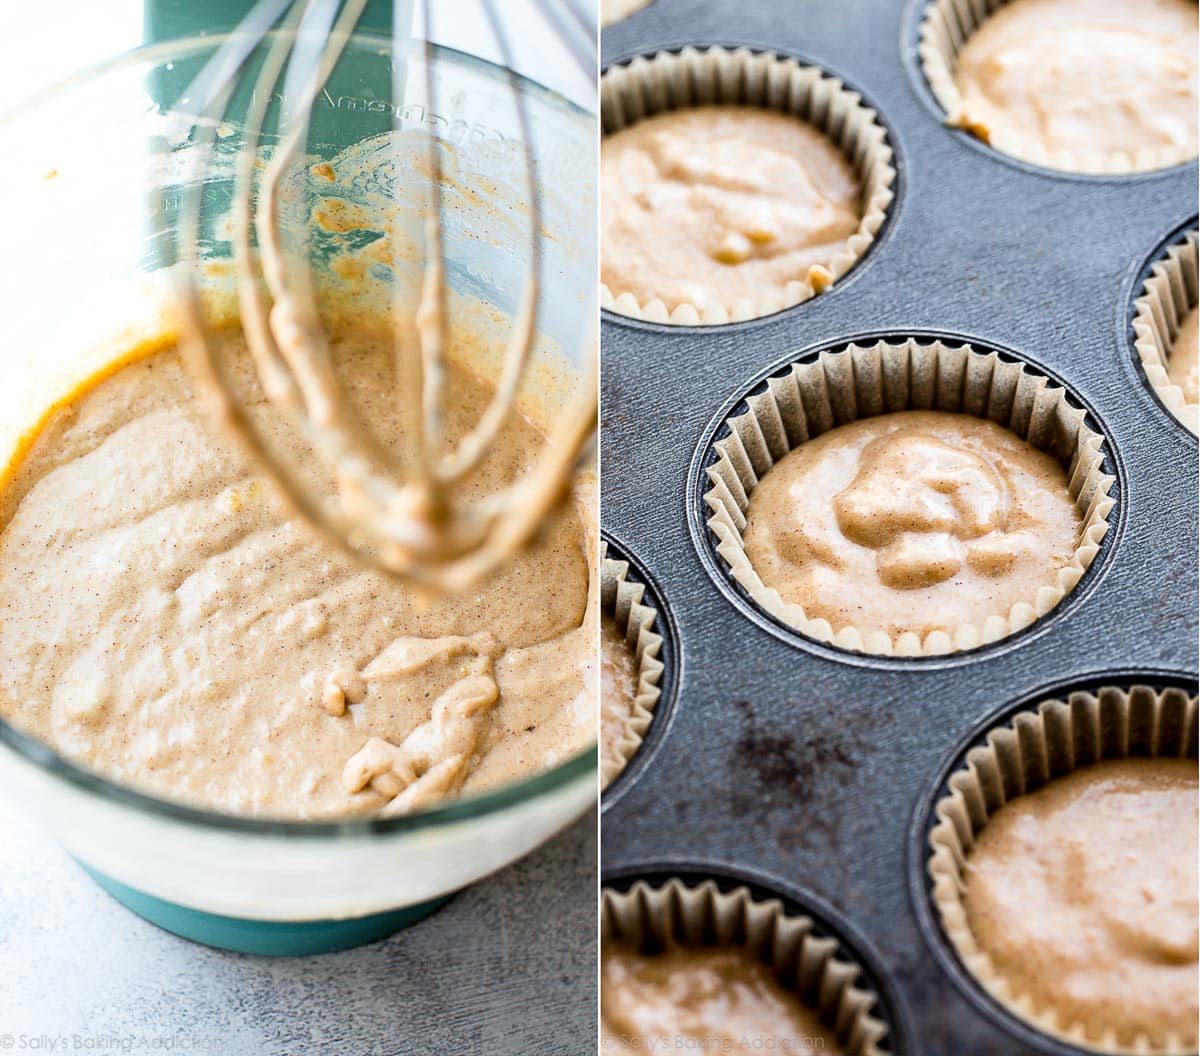 2 images of banana cupcake batter in a glass bowl and in a cupcake pan before baking